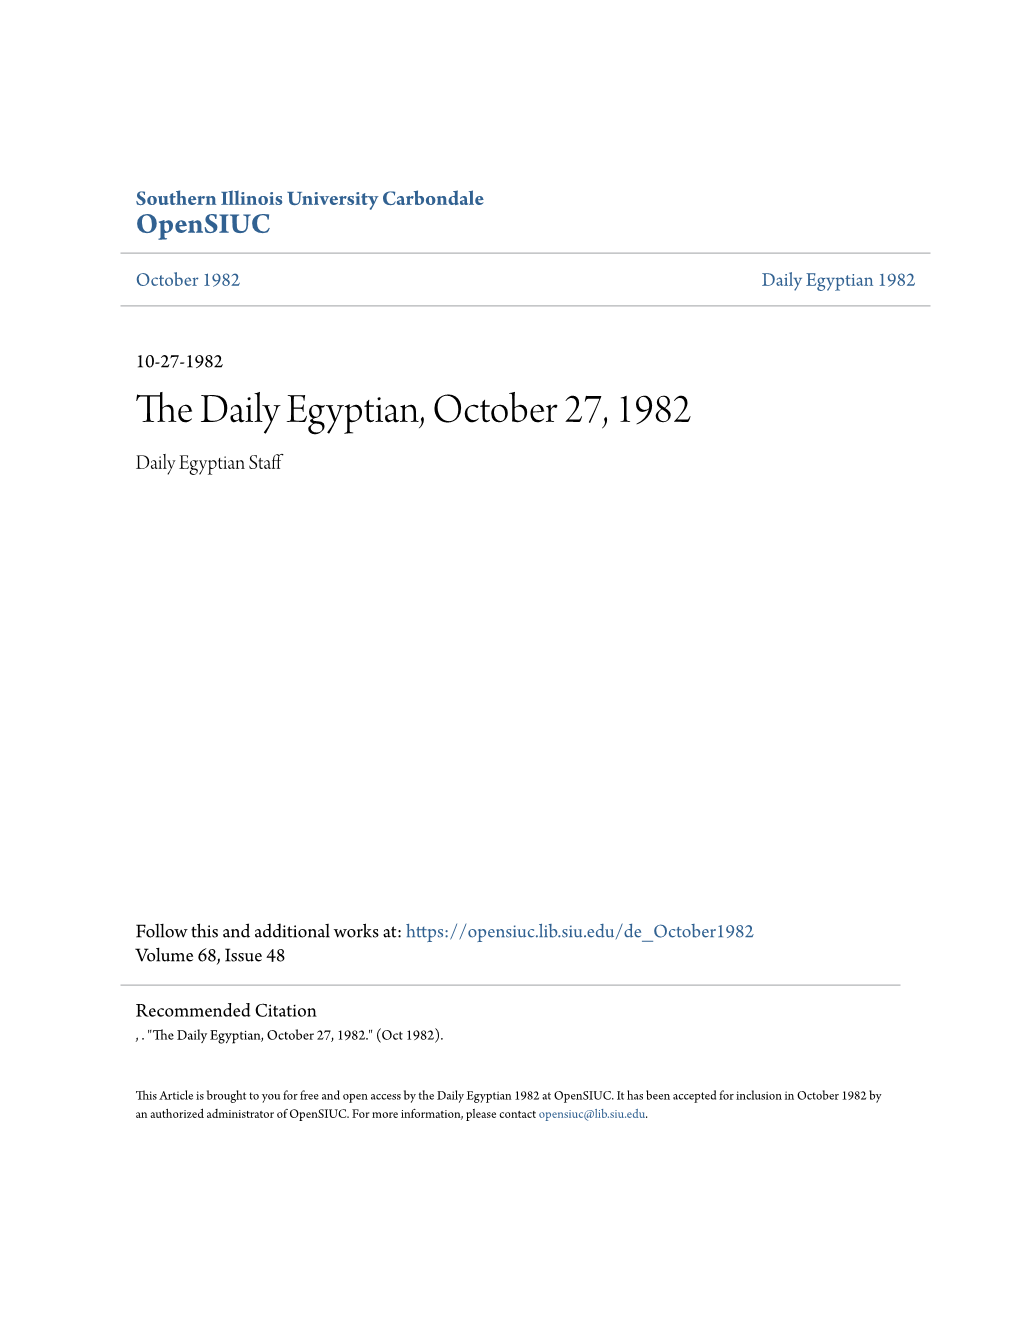 The Daily Egyptian, October 27, 1982